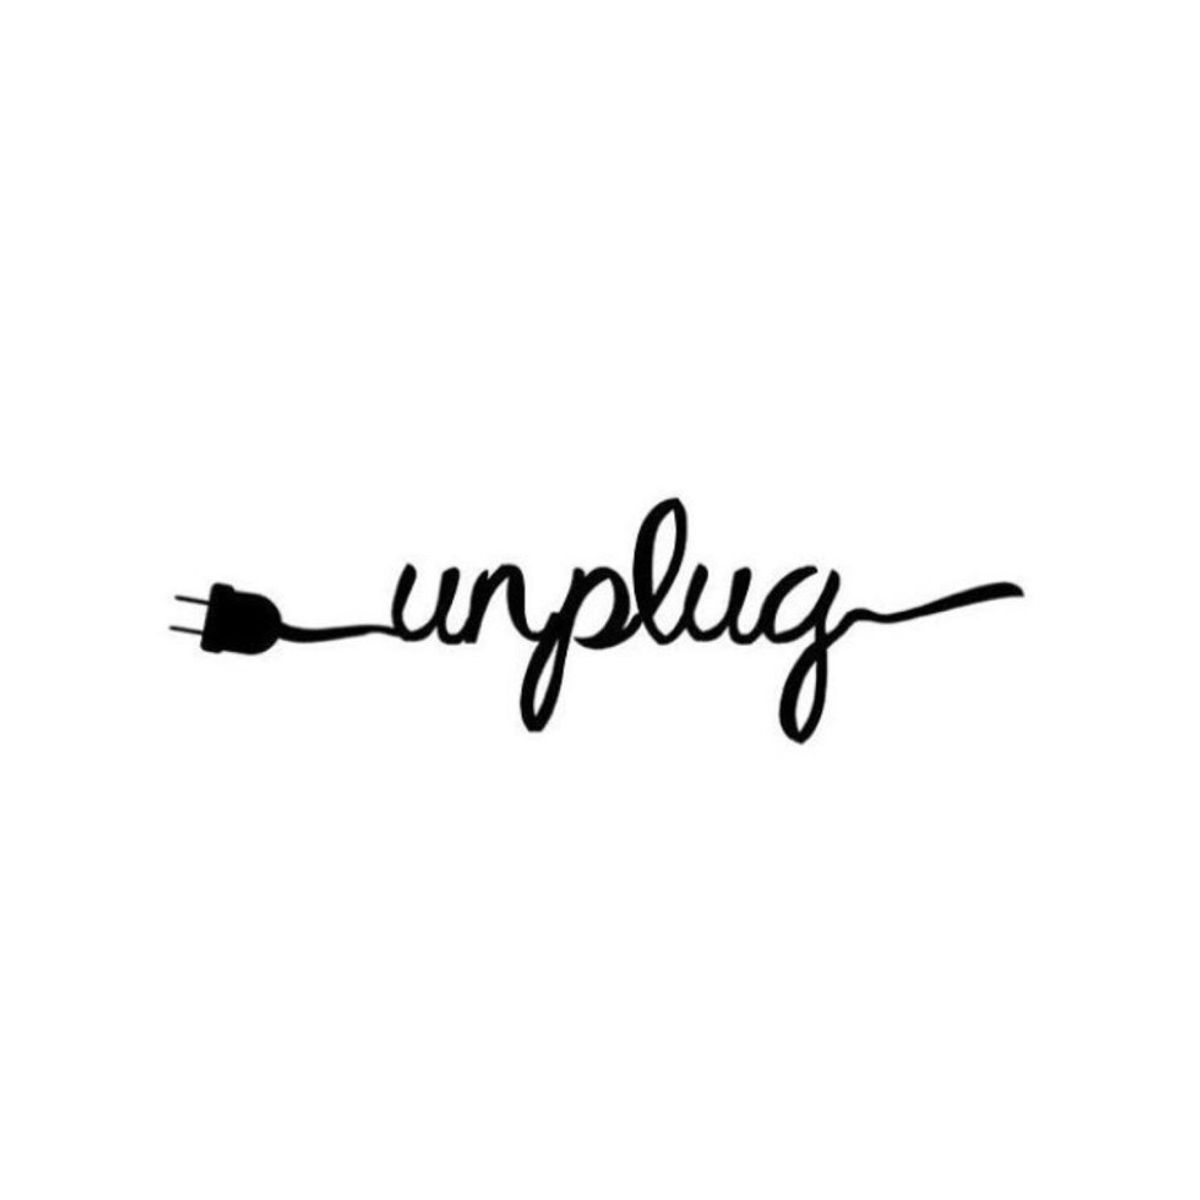 ​Why Don’t We "Unplug"?